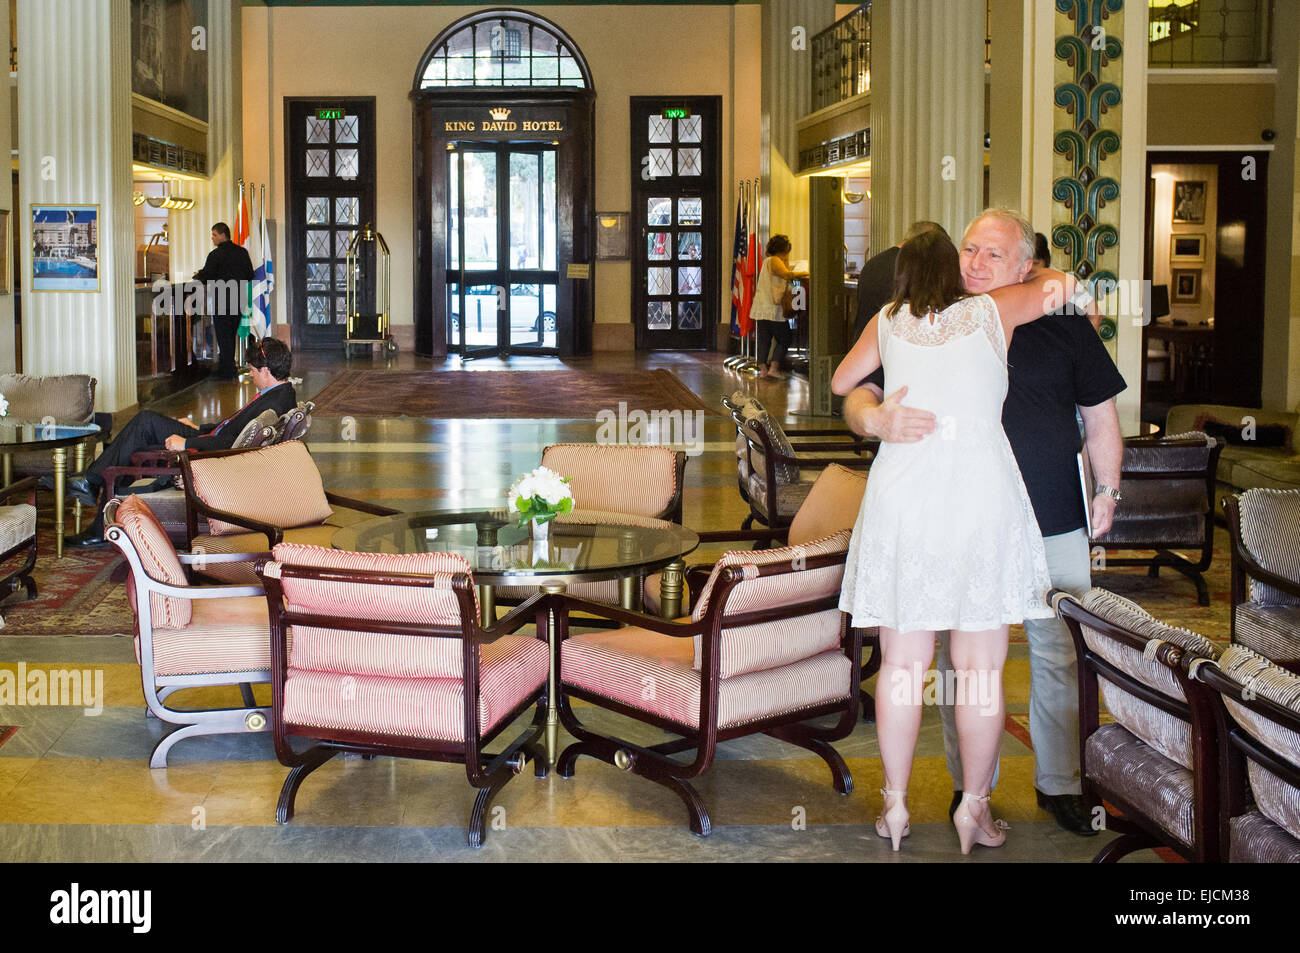 A man and woman hug in the King David Hotel elegant and luxurious lobby. The hotel has hosted many important dignitaries in its rich history including President Bush, Prince Charles, Prince Phillip, Ben Kingsley and Mohammed Ali. Jerusalem, Israel. 19-June-2012. Stock Photo